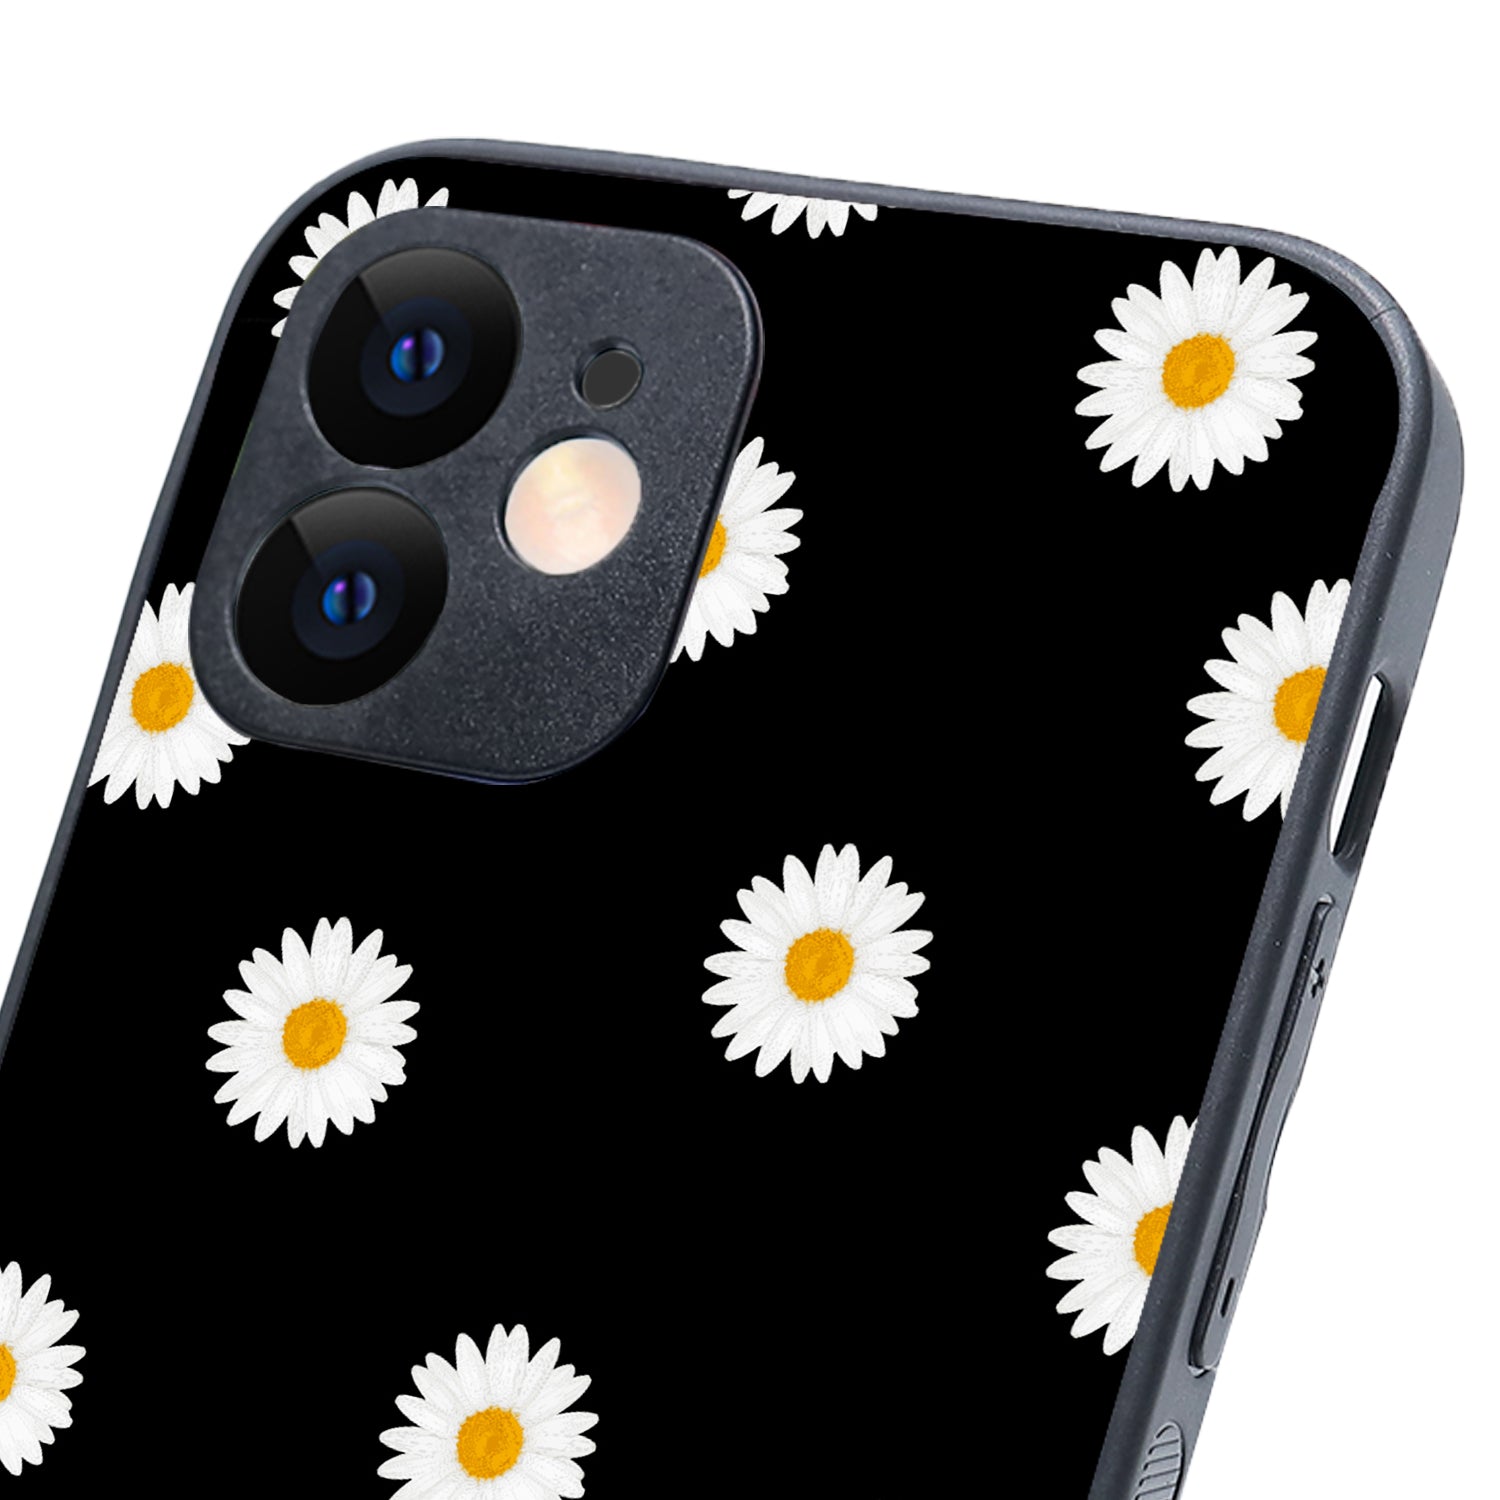 White Sunflower Floral iPhone 12 Case